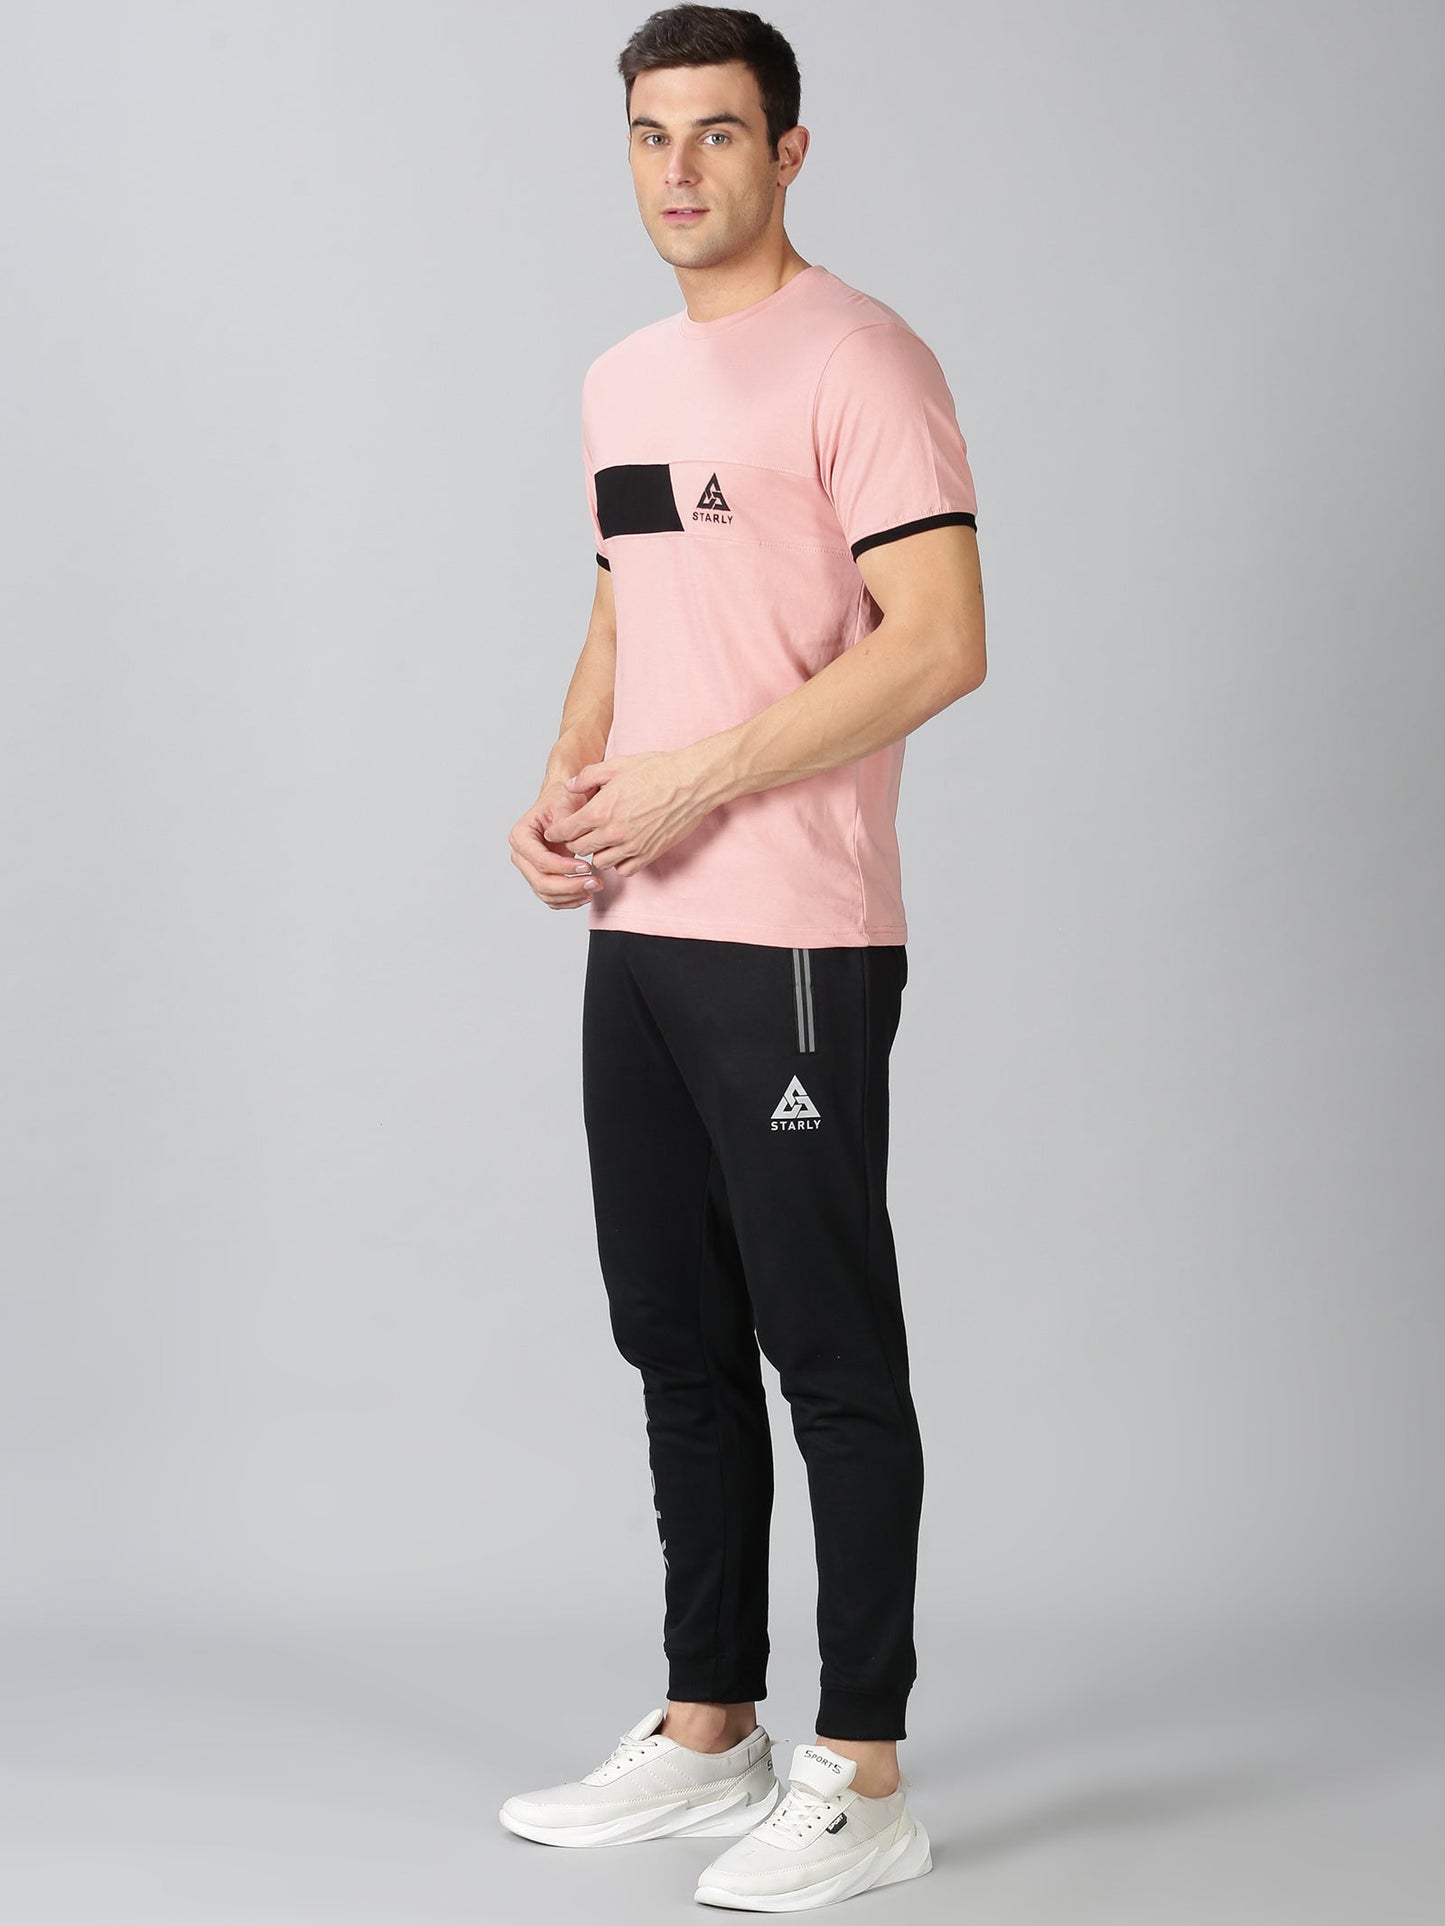 Peach & Black Co-Ords Tracksuit